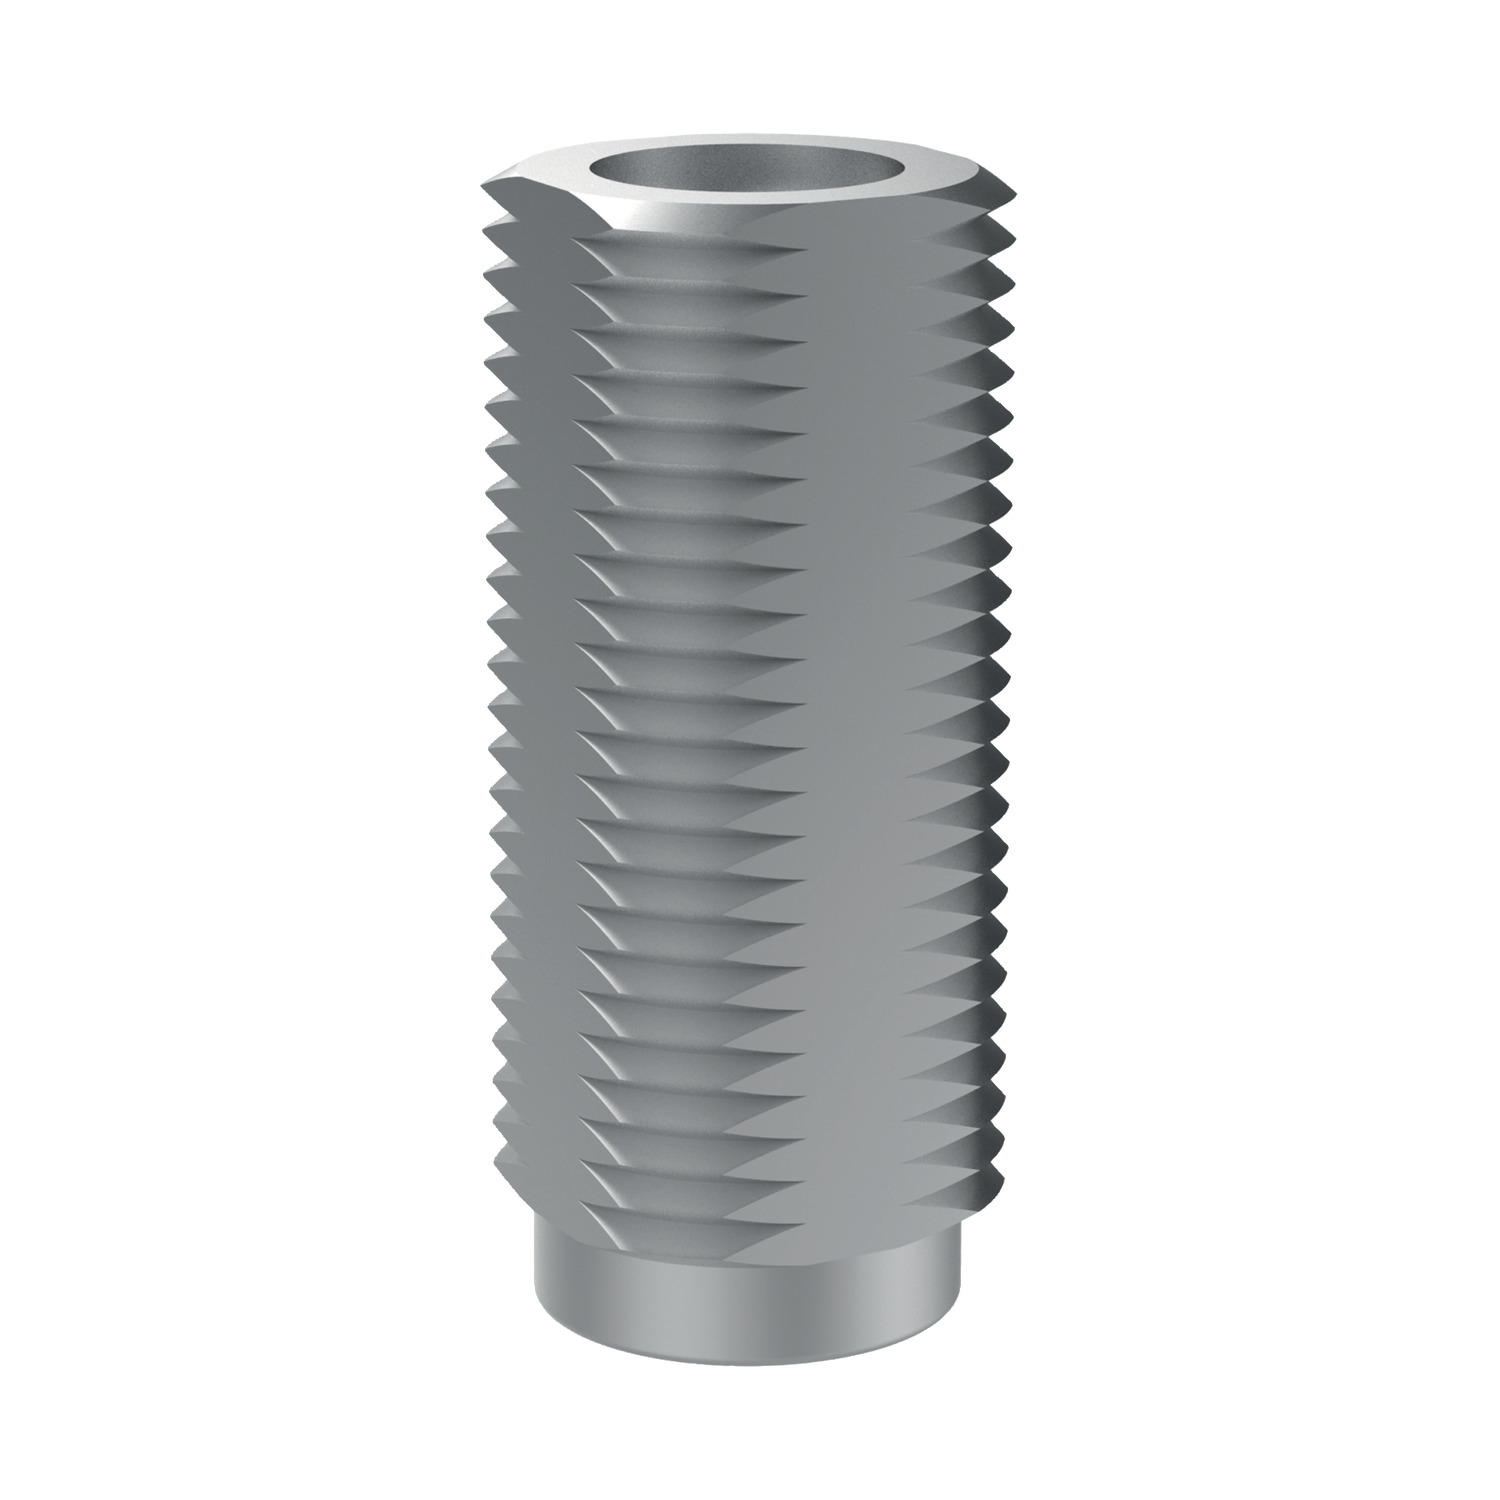 Product 32860.1, Side-Thrust Pins - Threaded without seal - for use with pins of your own design / 